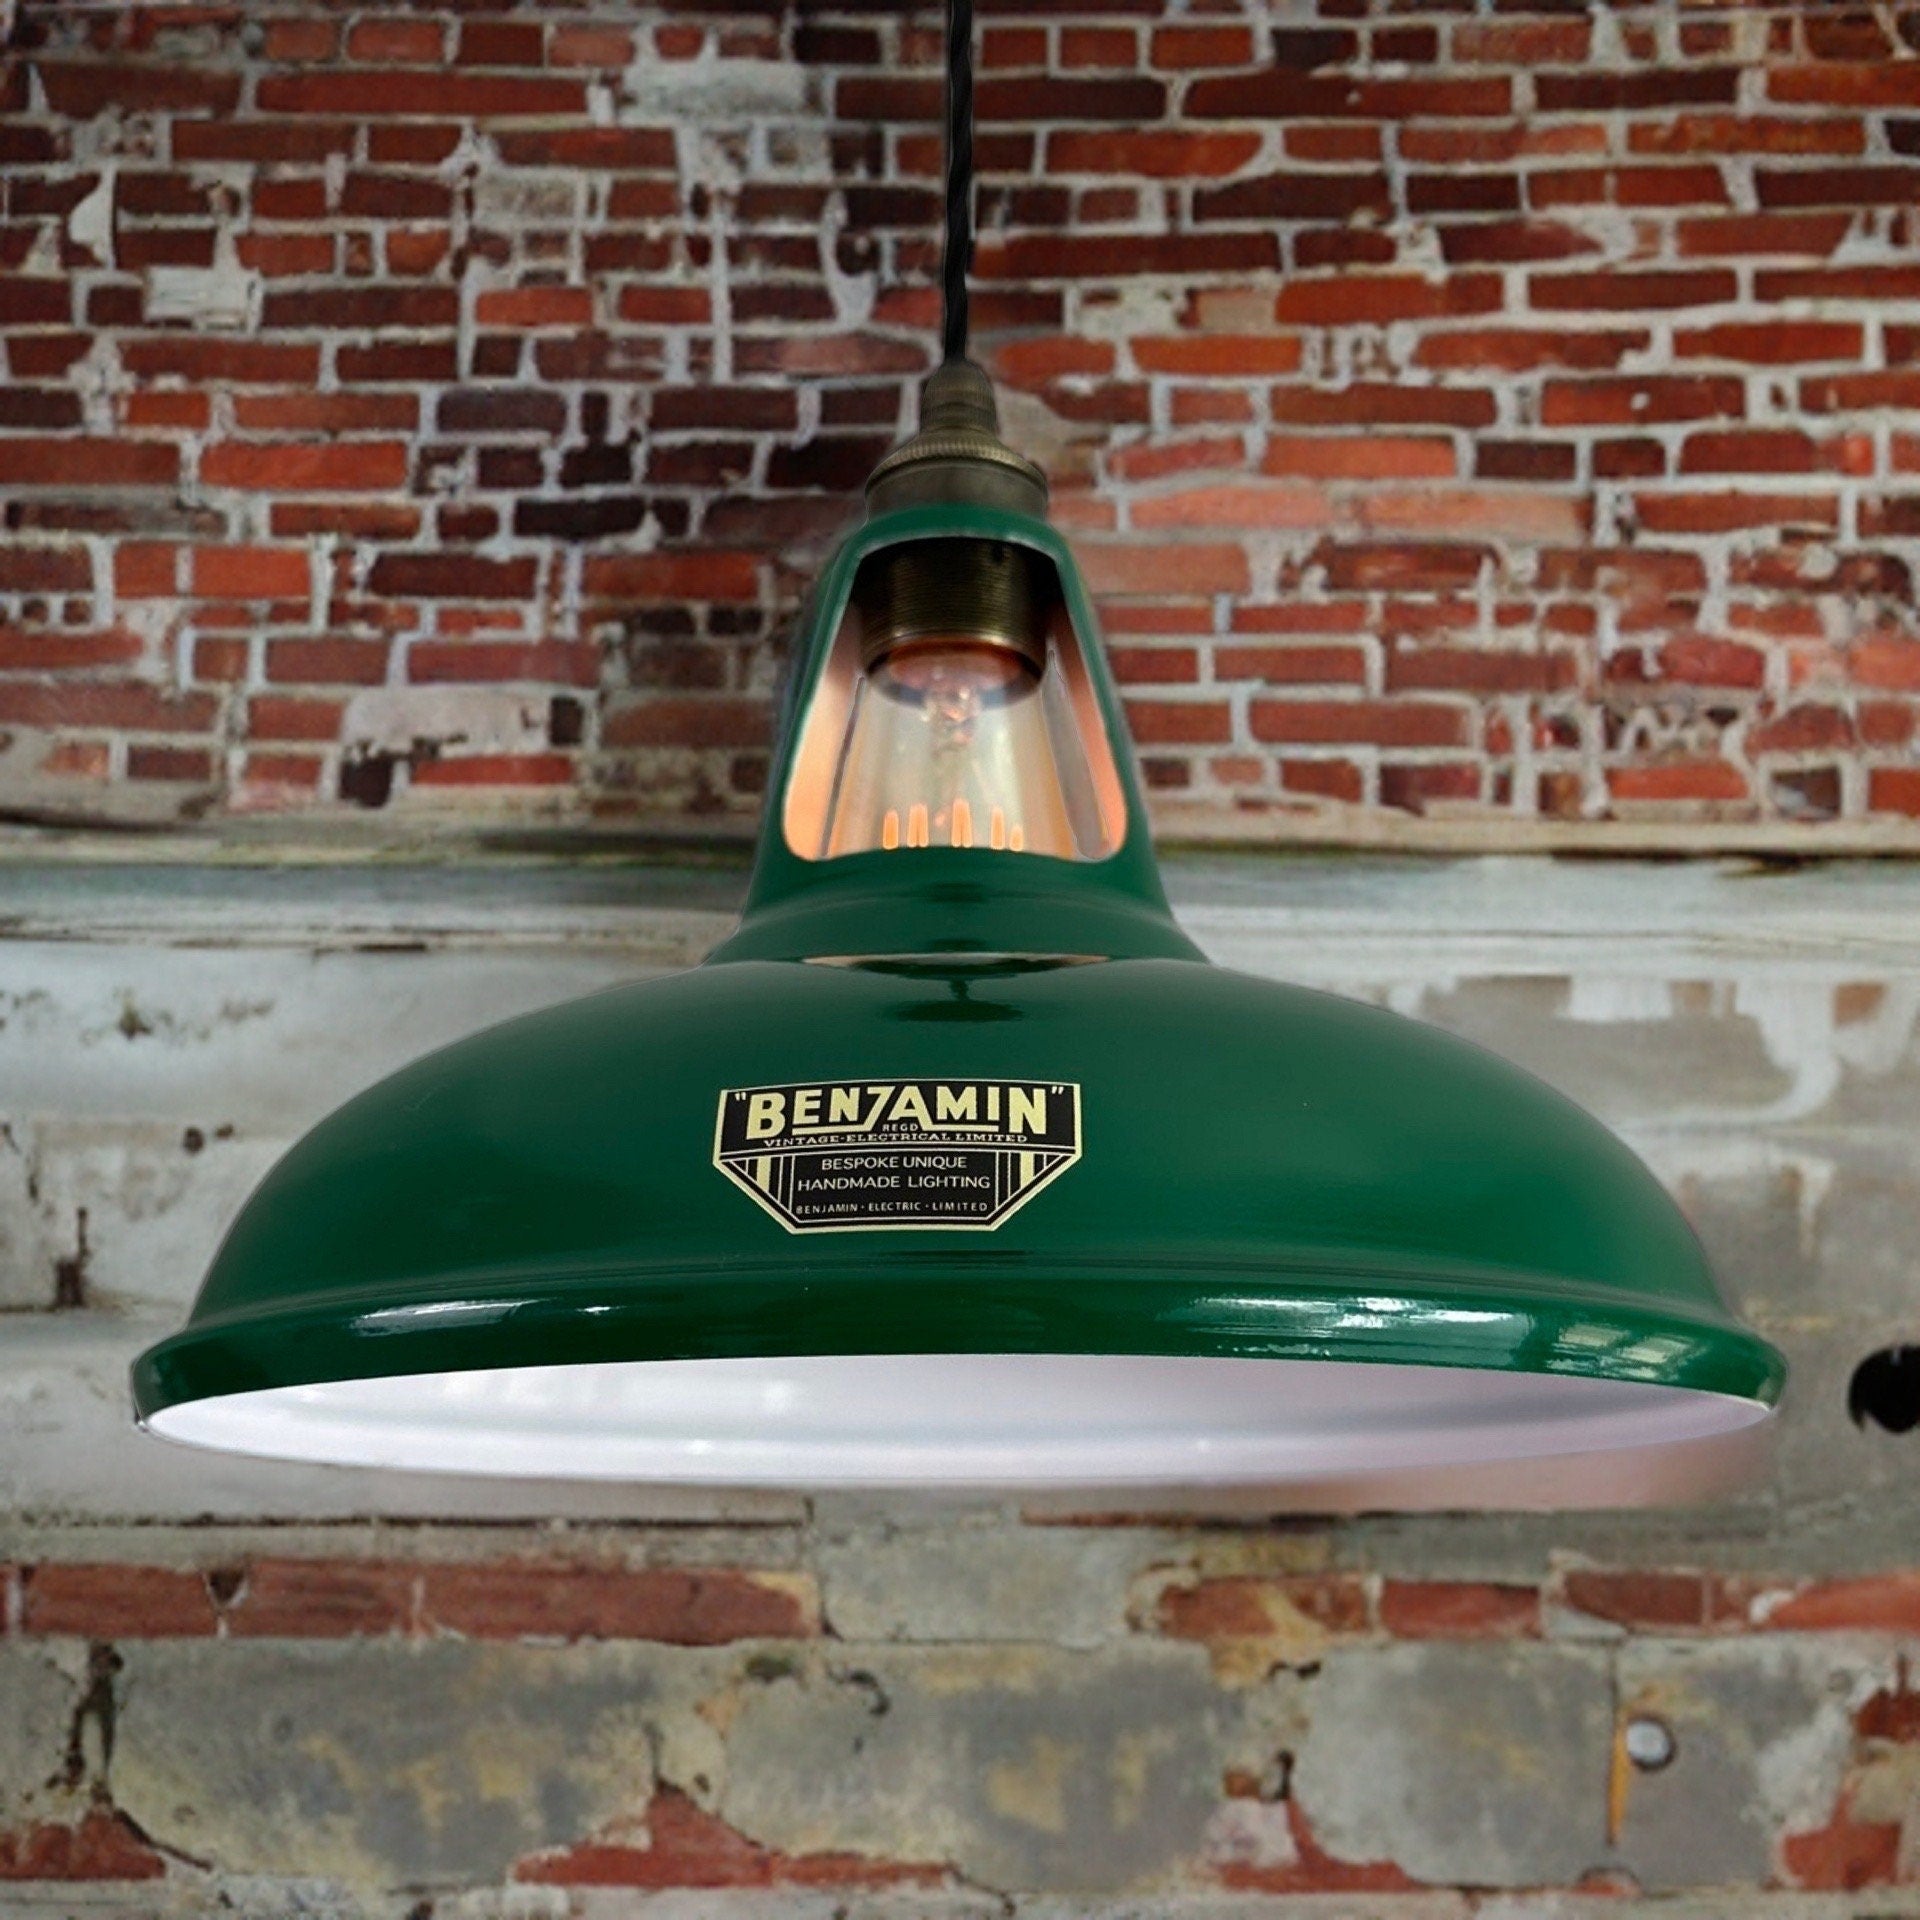 Cawston ~ Racing Green Solid Shade Slotted Design Pendant Set Light | Ceiling Dining Room | Kitchen Table | Vintage Filament Bulb | 11 Inch